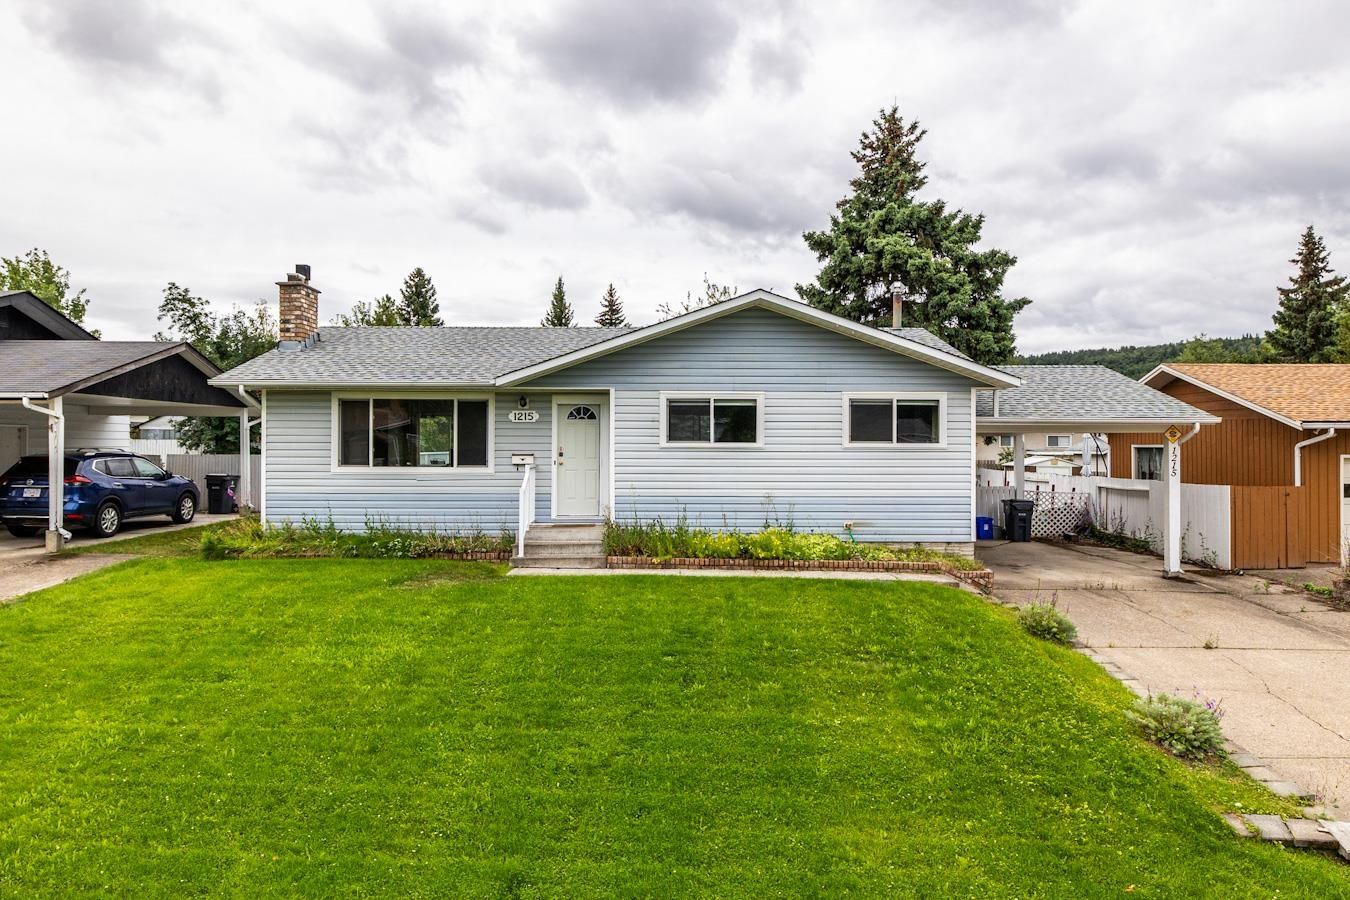 New property listed in Lakewood, PG City West